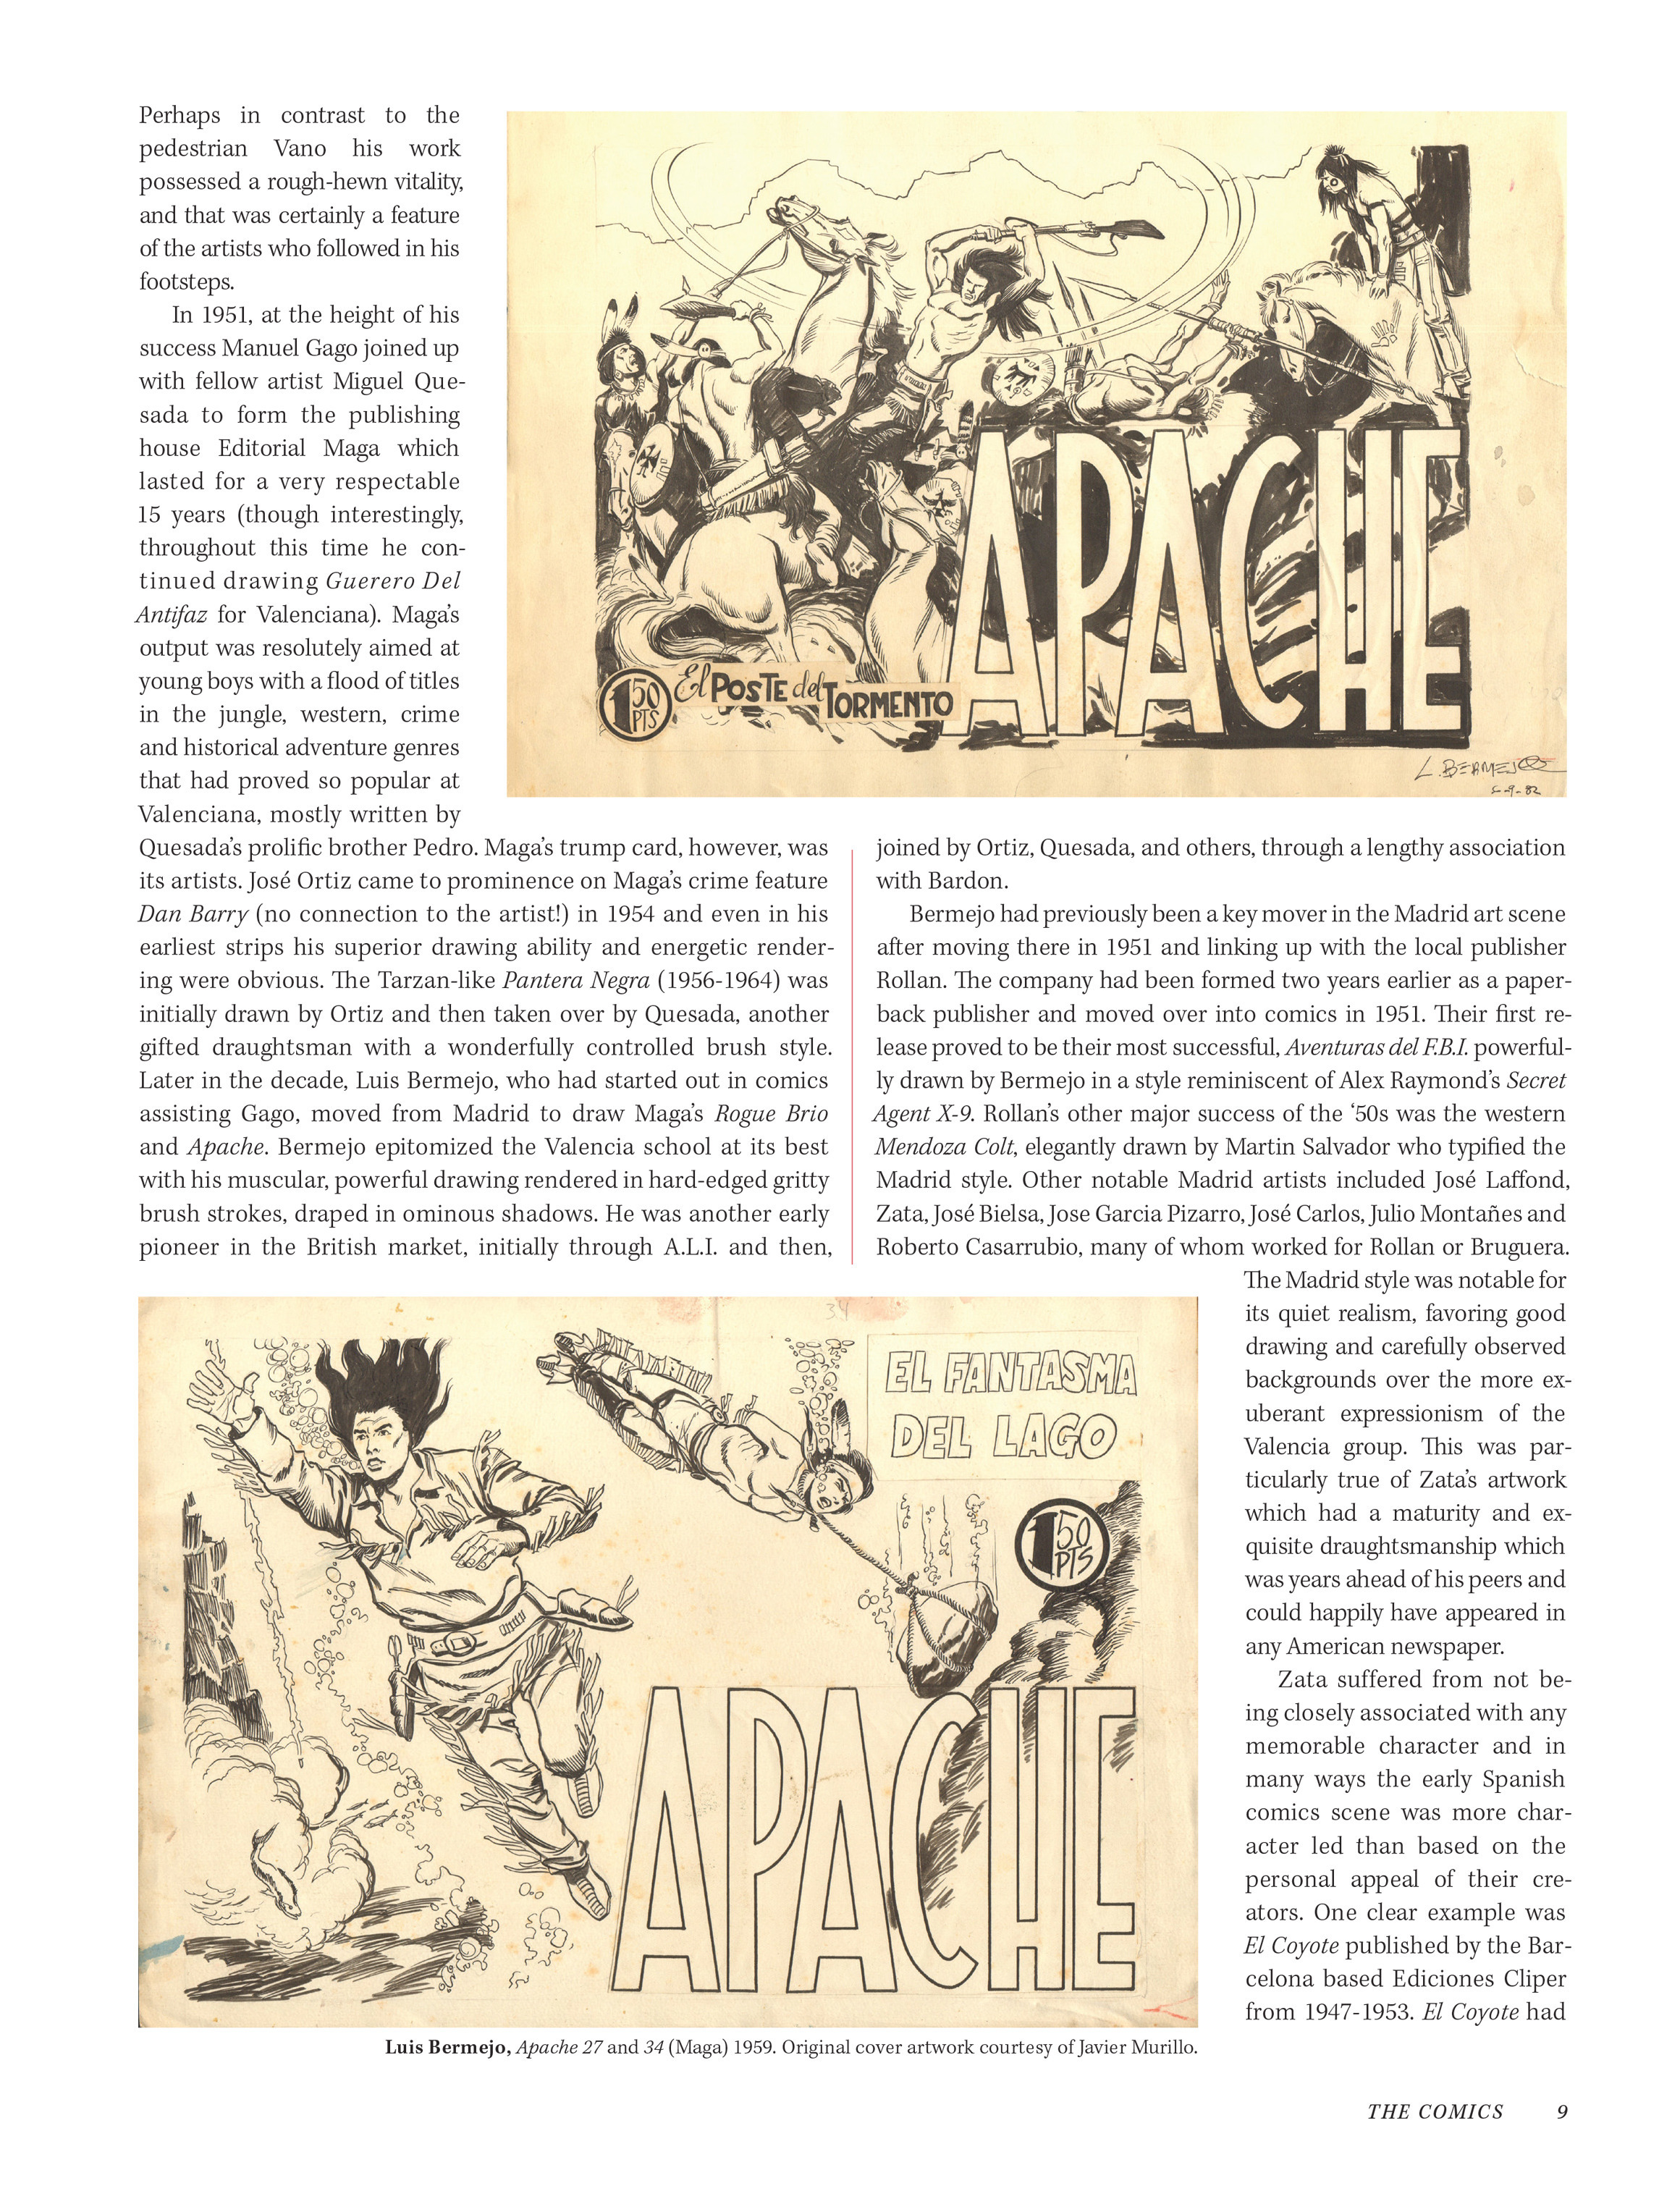 Read online Masters of Spanish Comic Book Art comic -  Issue # TPB (Part 1) - 10